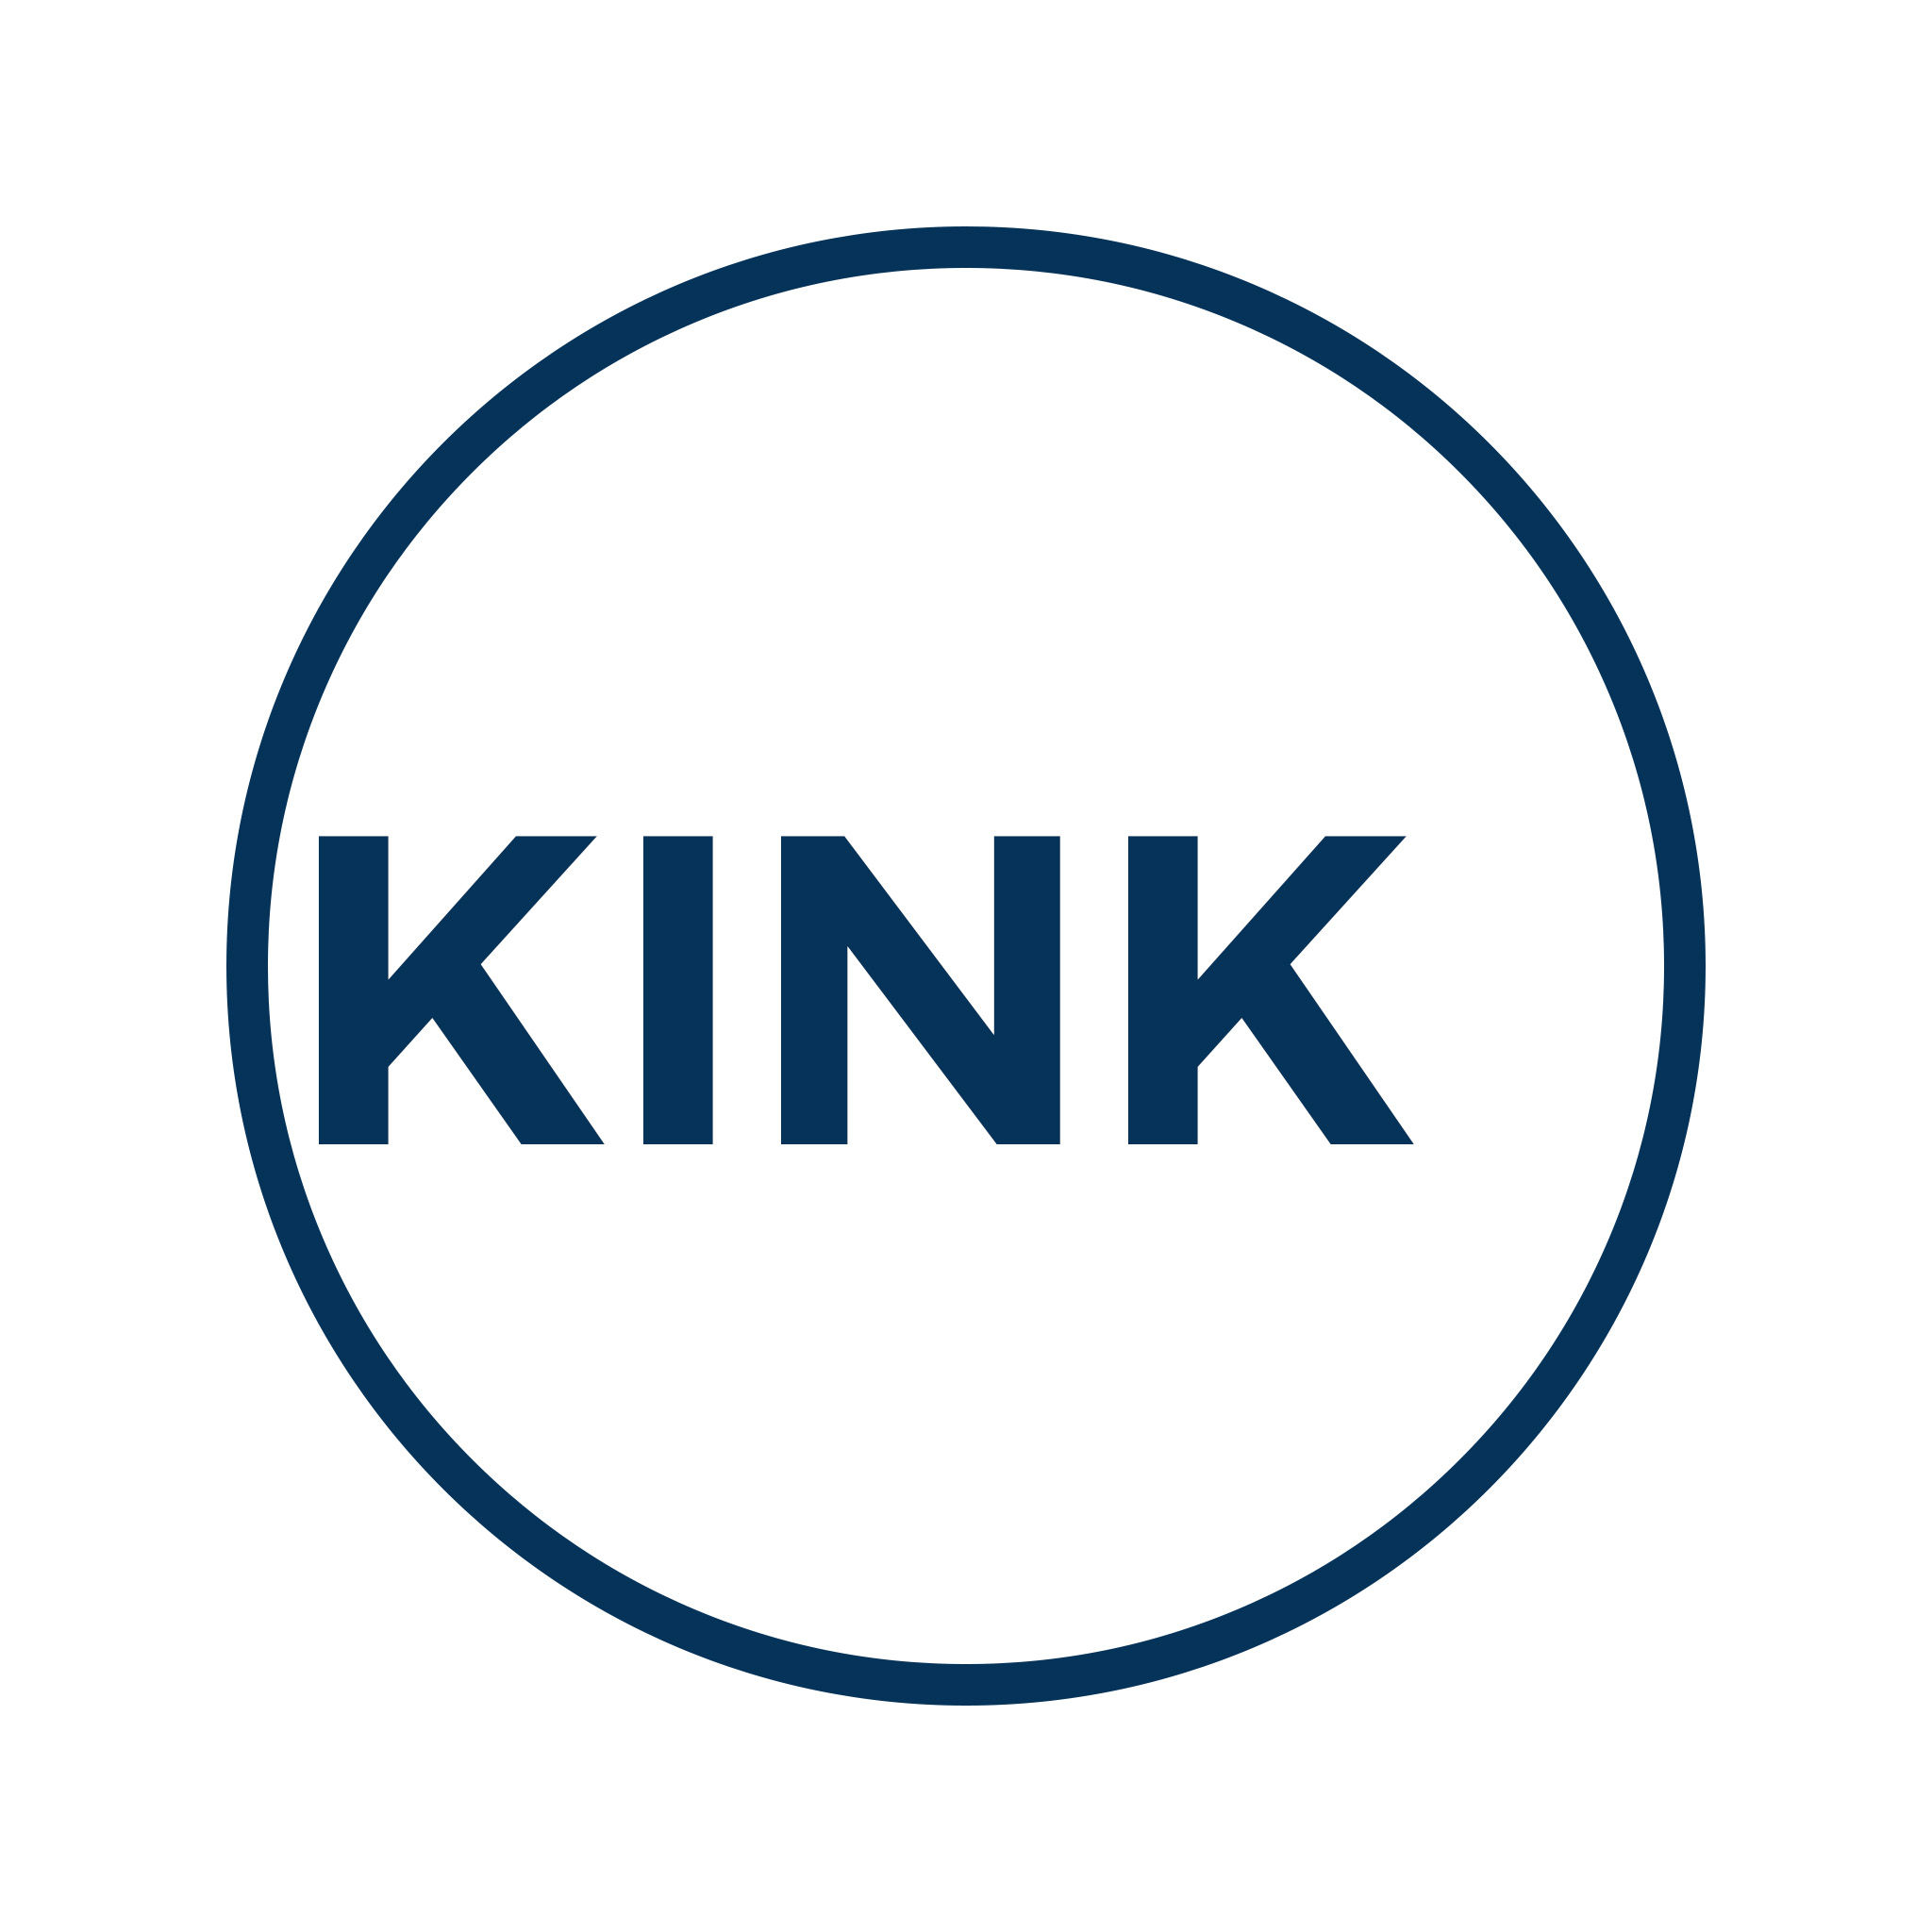 The word KINK in blue surrounded by a blue circle on a white background.